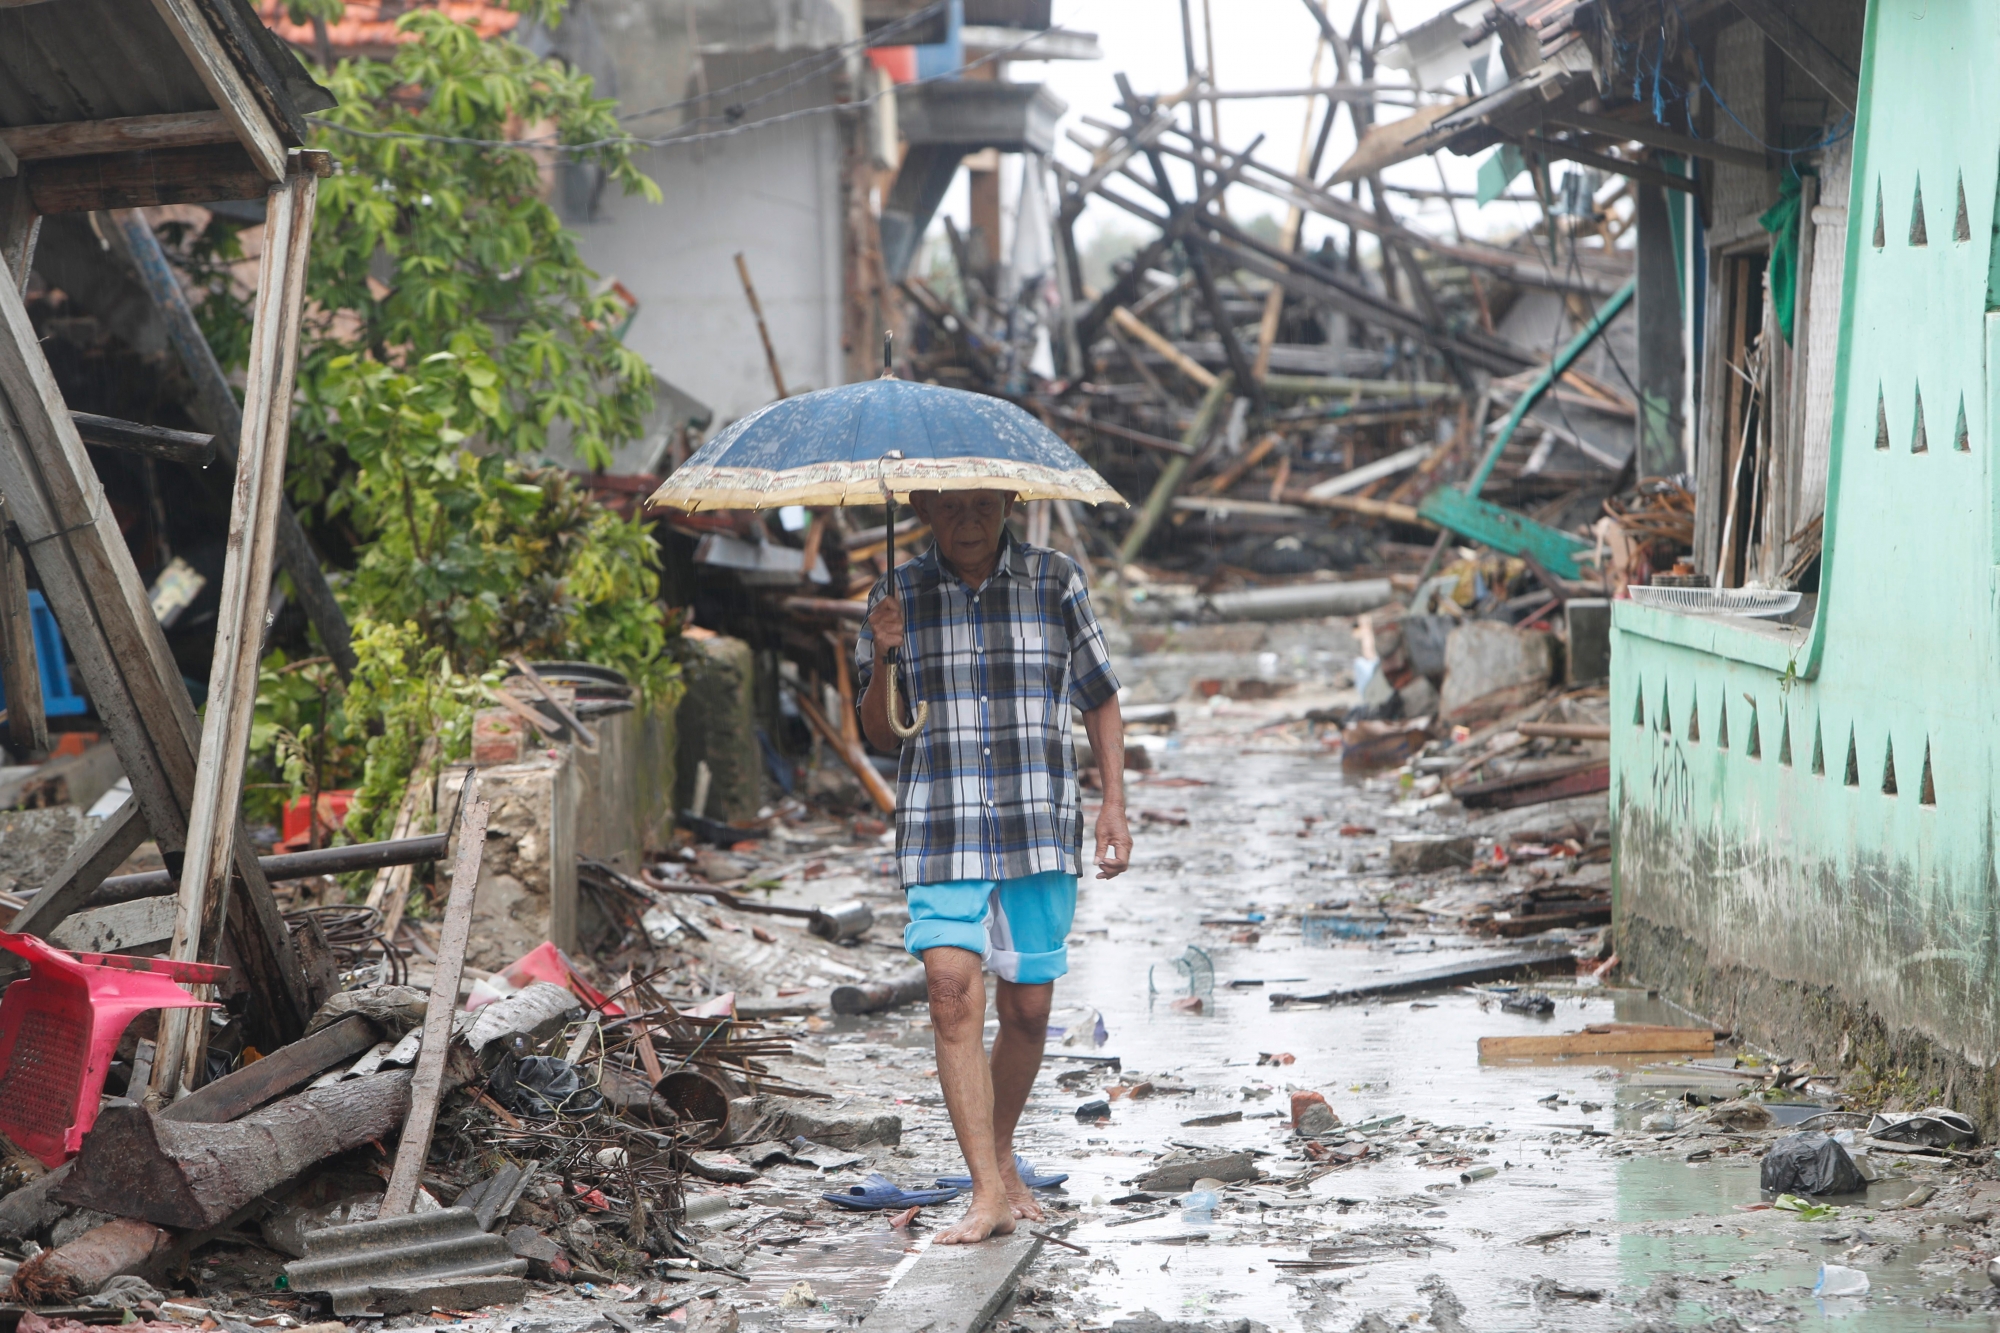 epa07248151 Local residents walk among debris in devastated area after a tsunami hit Sunda Strait in Sumur, Banten, Indonesia, 25 December 2018. According to the Indonesian National Board for Disaster Management (BNPB), at least 429 people died and 1,459 others have been injured after a tsunami hit the coastal regions of the Sunda Strait.  EPA/ADI WEDA INDONESIA TSUNAMI